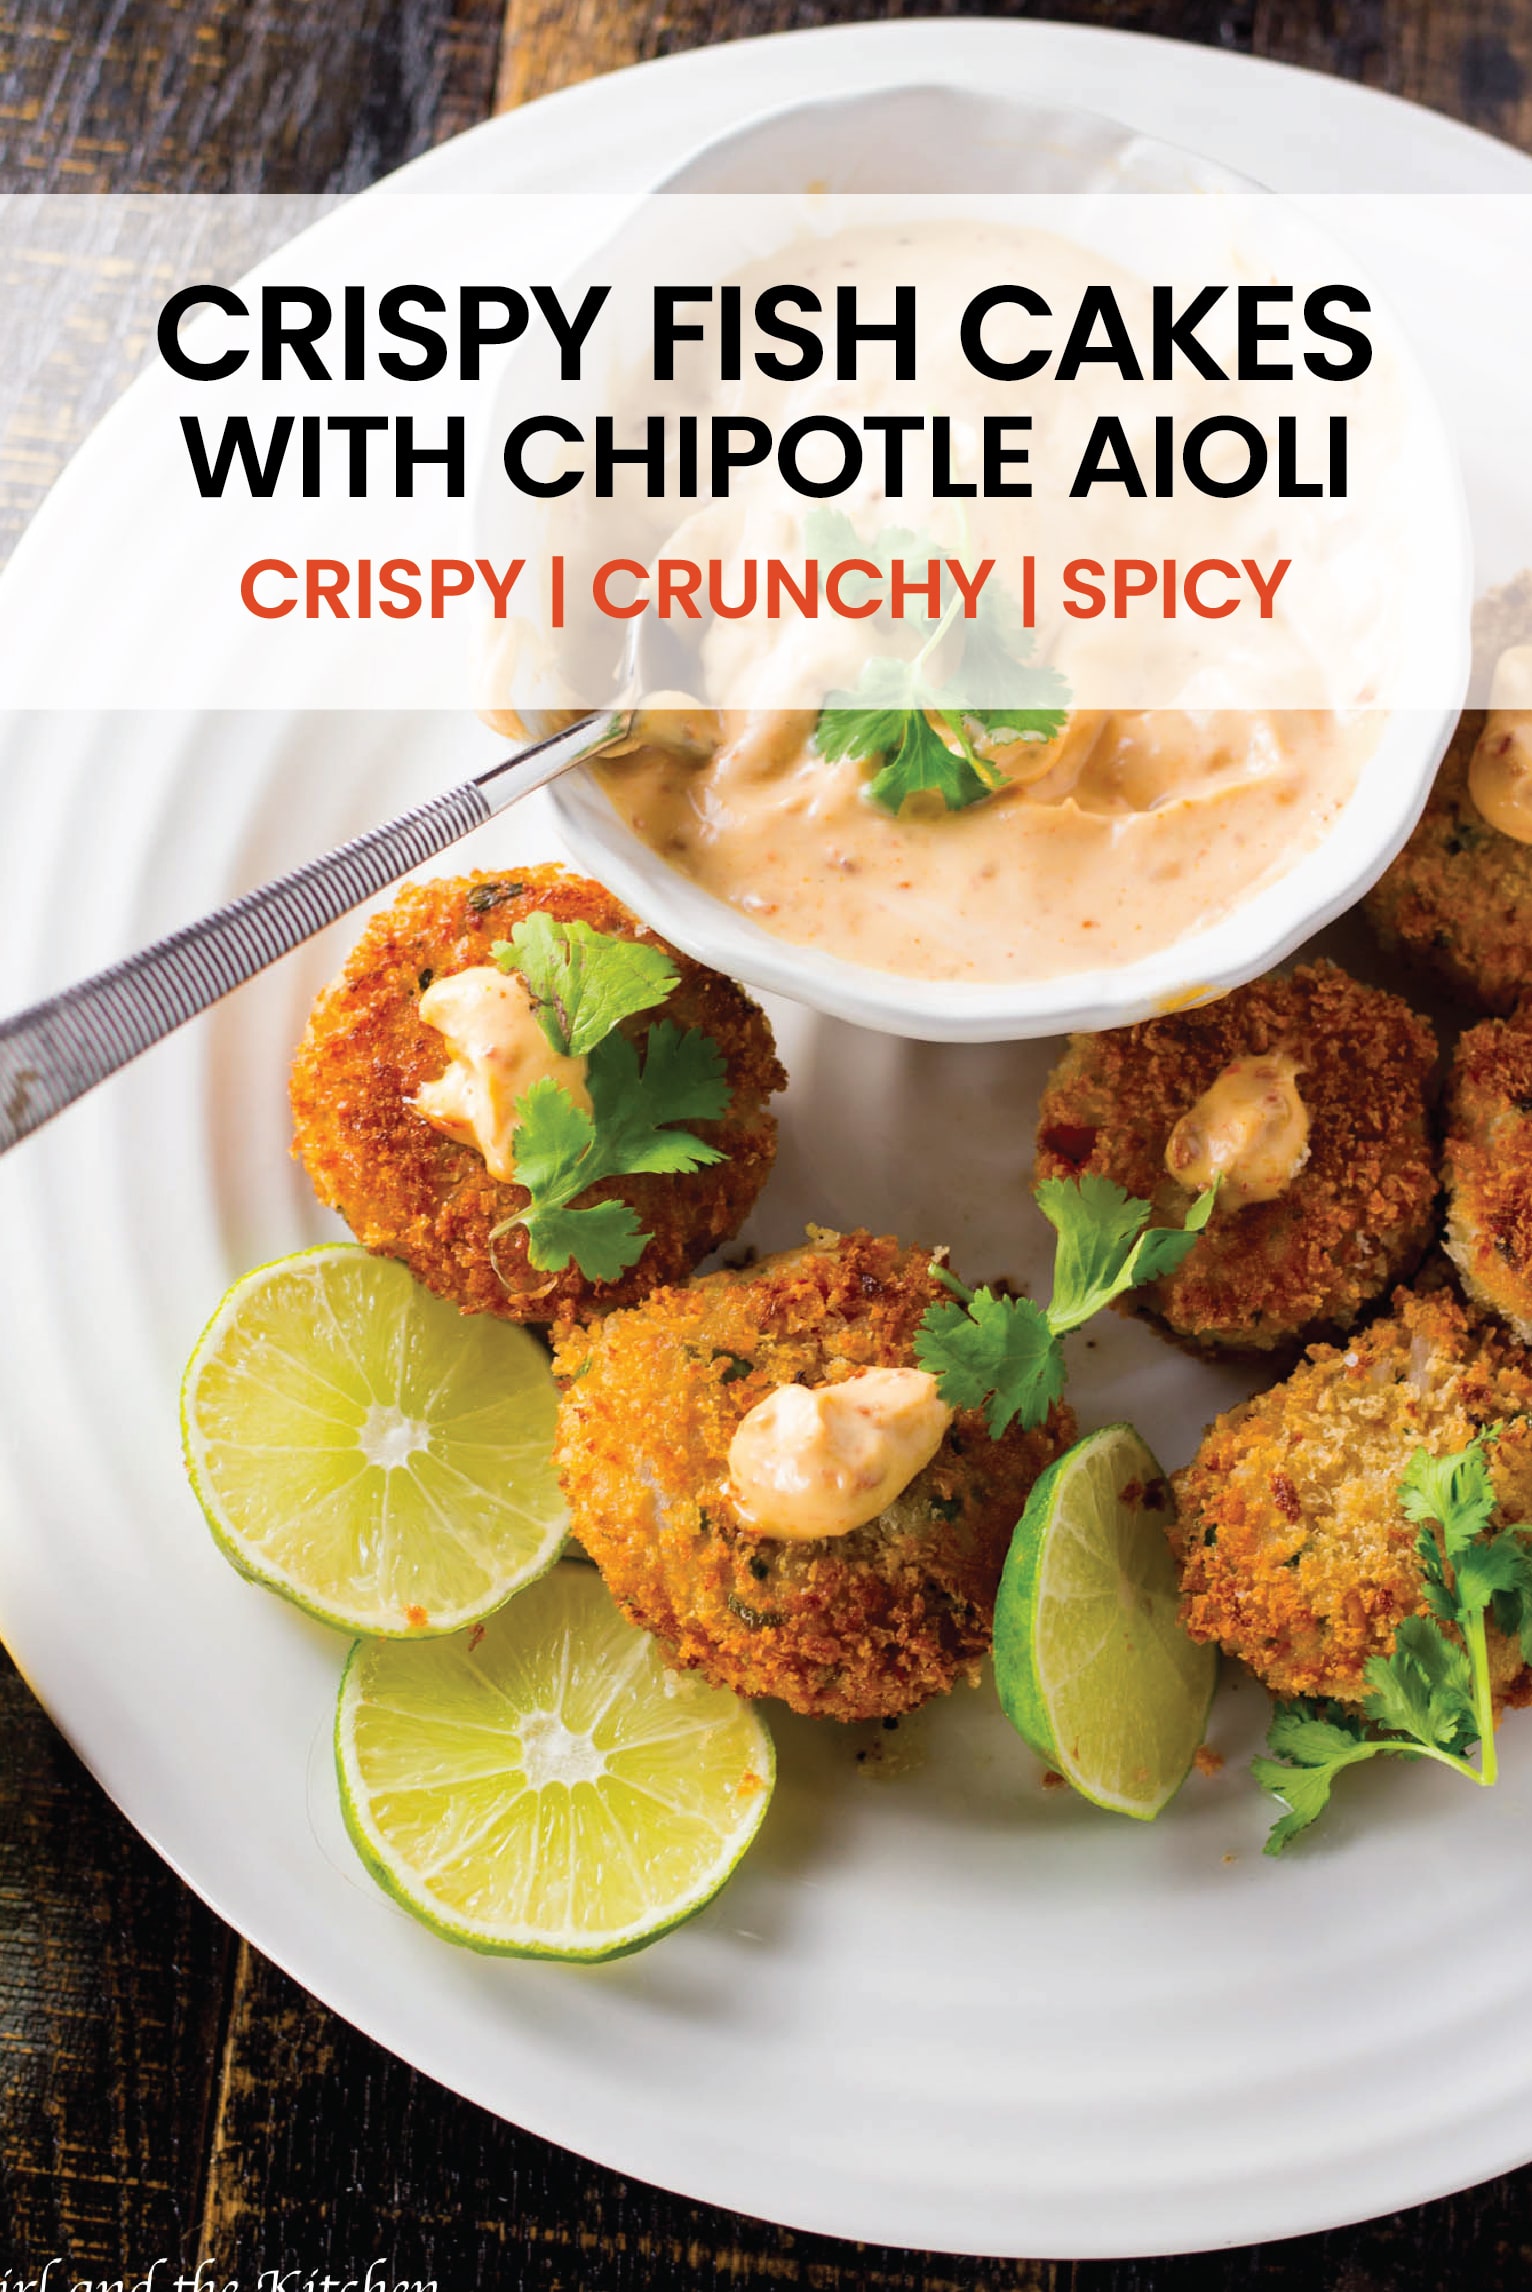 This delicious little tuna cakes are crispy, crunchy and spicy!  This new spin on simple tuna from a can will be your next appetizer go to!  #fishcakes #chipotle